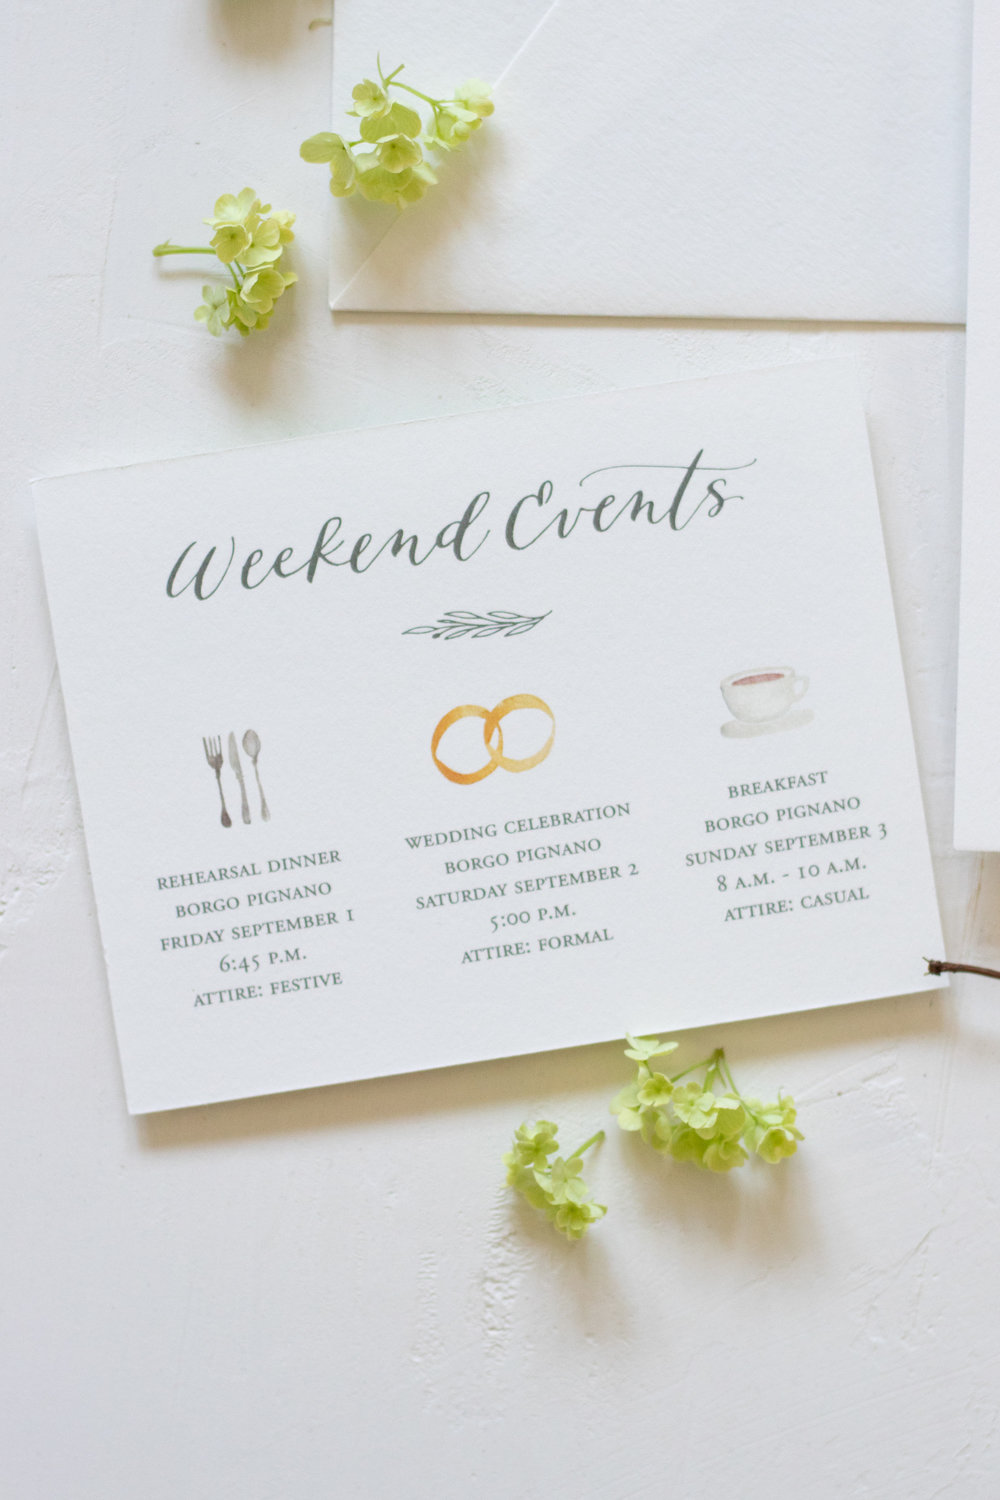 Weekend Events Card with Watercolor Illustrations